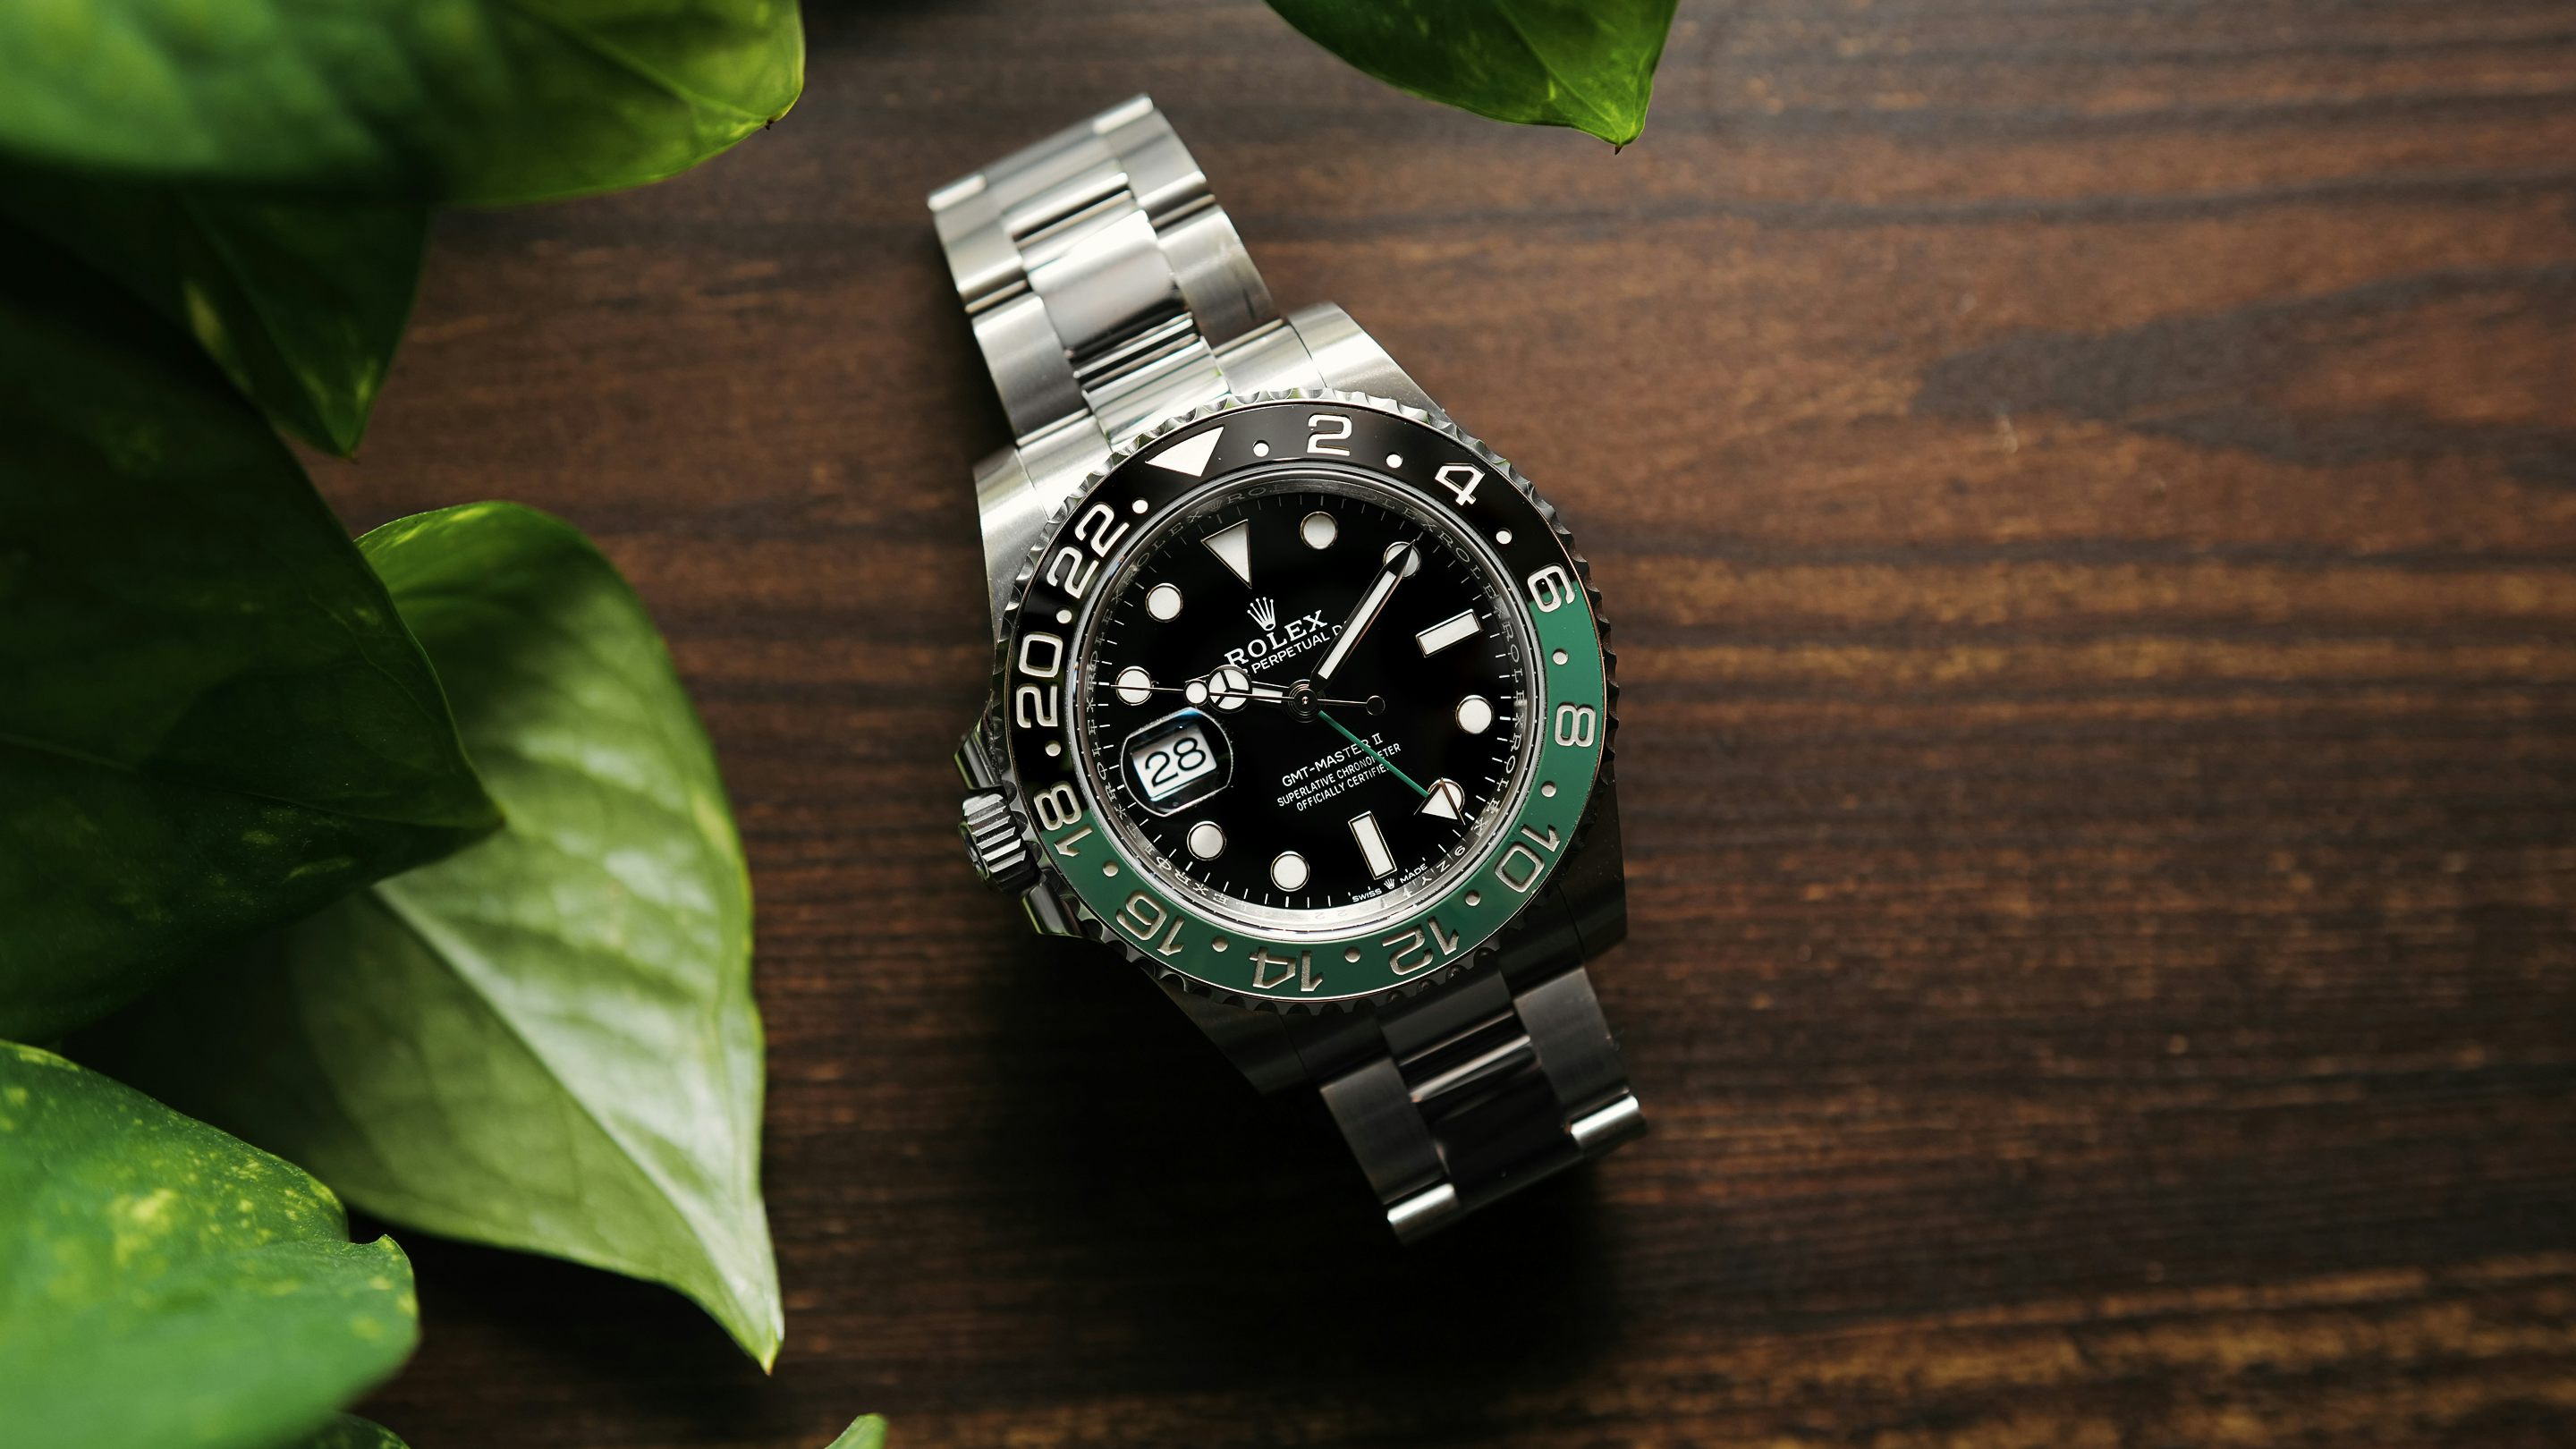 Weekend: Rolex Price And Daniel Craig's MoonSwatch